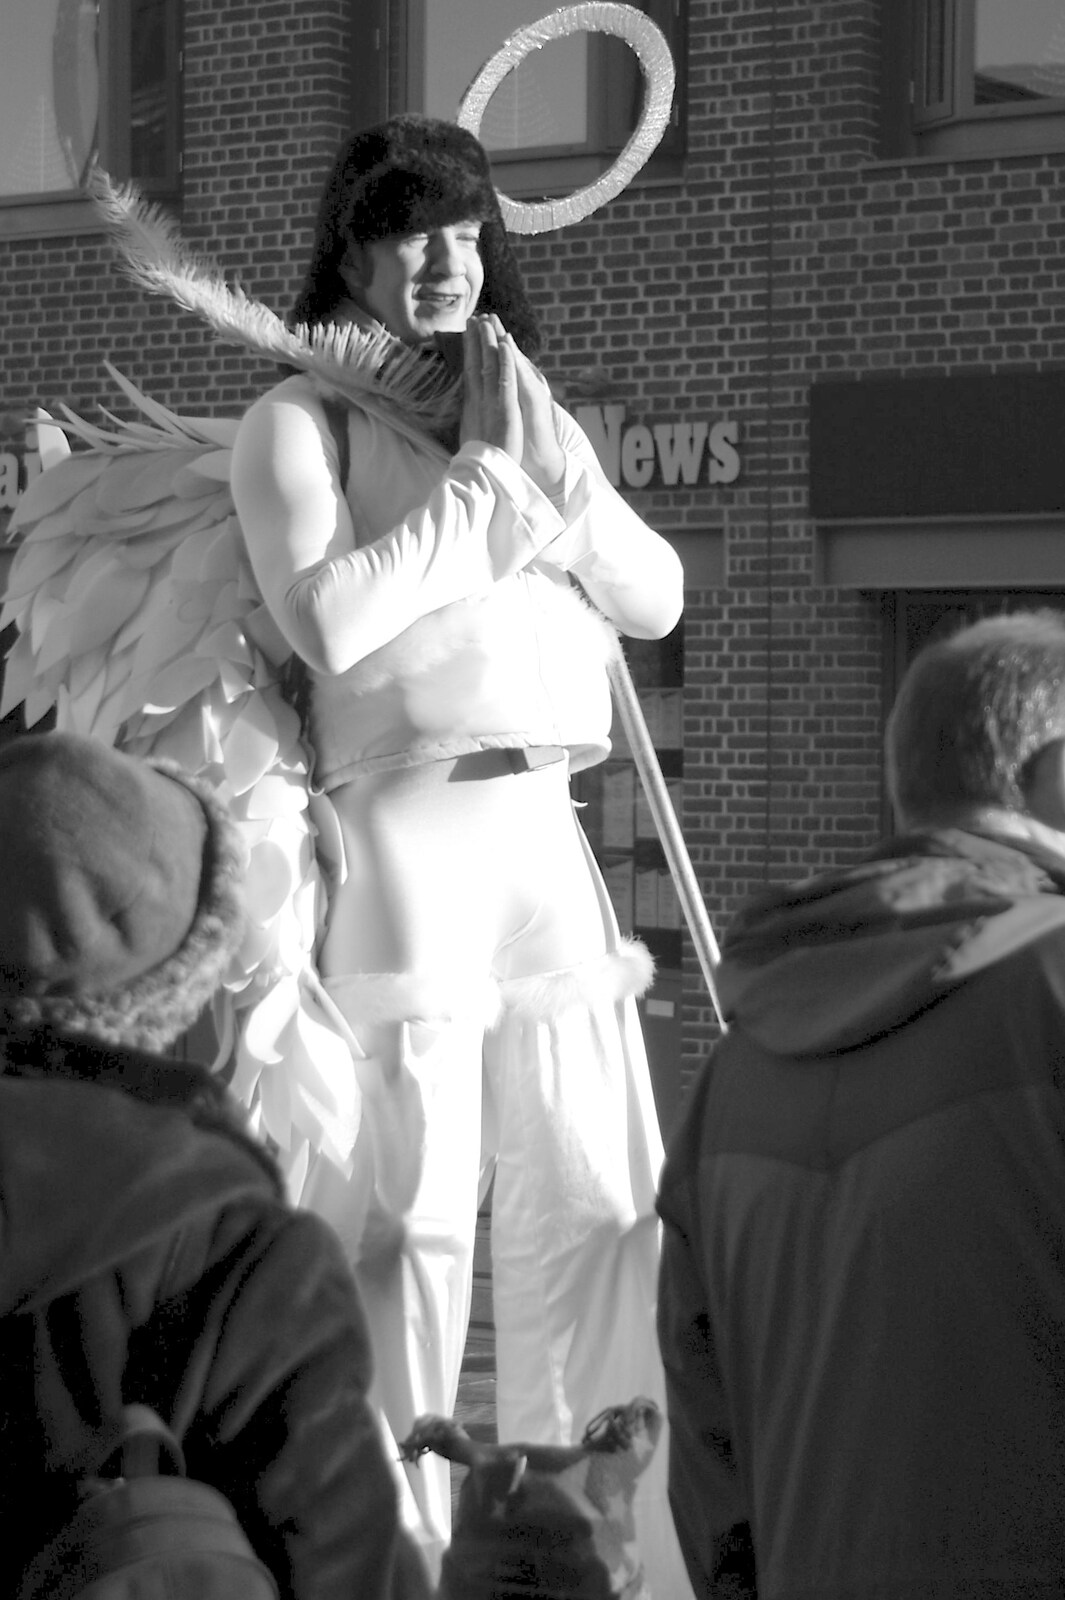 There's an angel on stilts from Christmas Shopping and a Carol Service, Norwich and Thrandeston - 19th December 2004